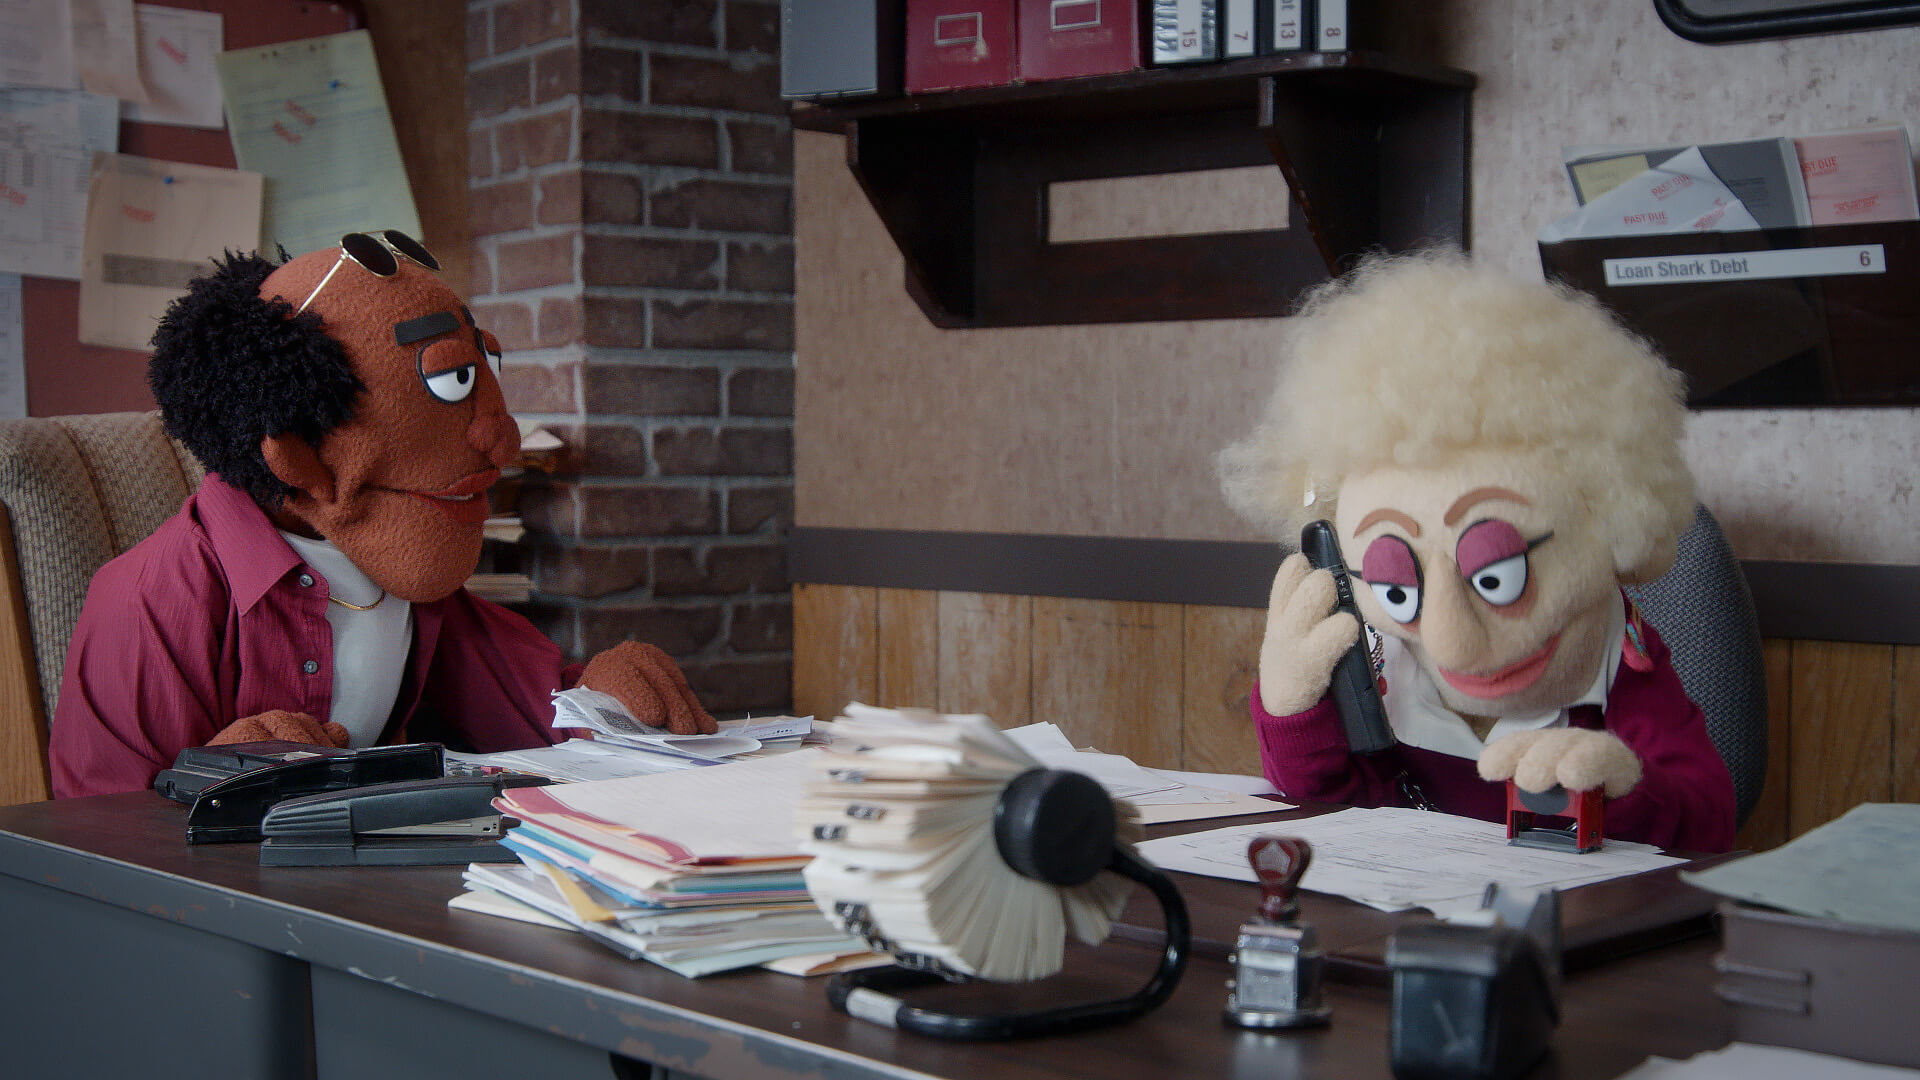 A female debt collector answers a prank call in a scene directed by Todd Bishop for Comedy Central's Crank Yankers